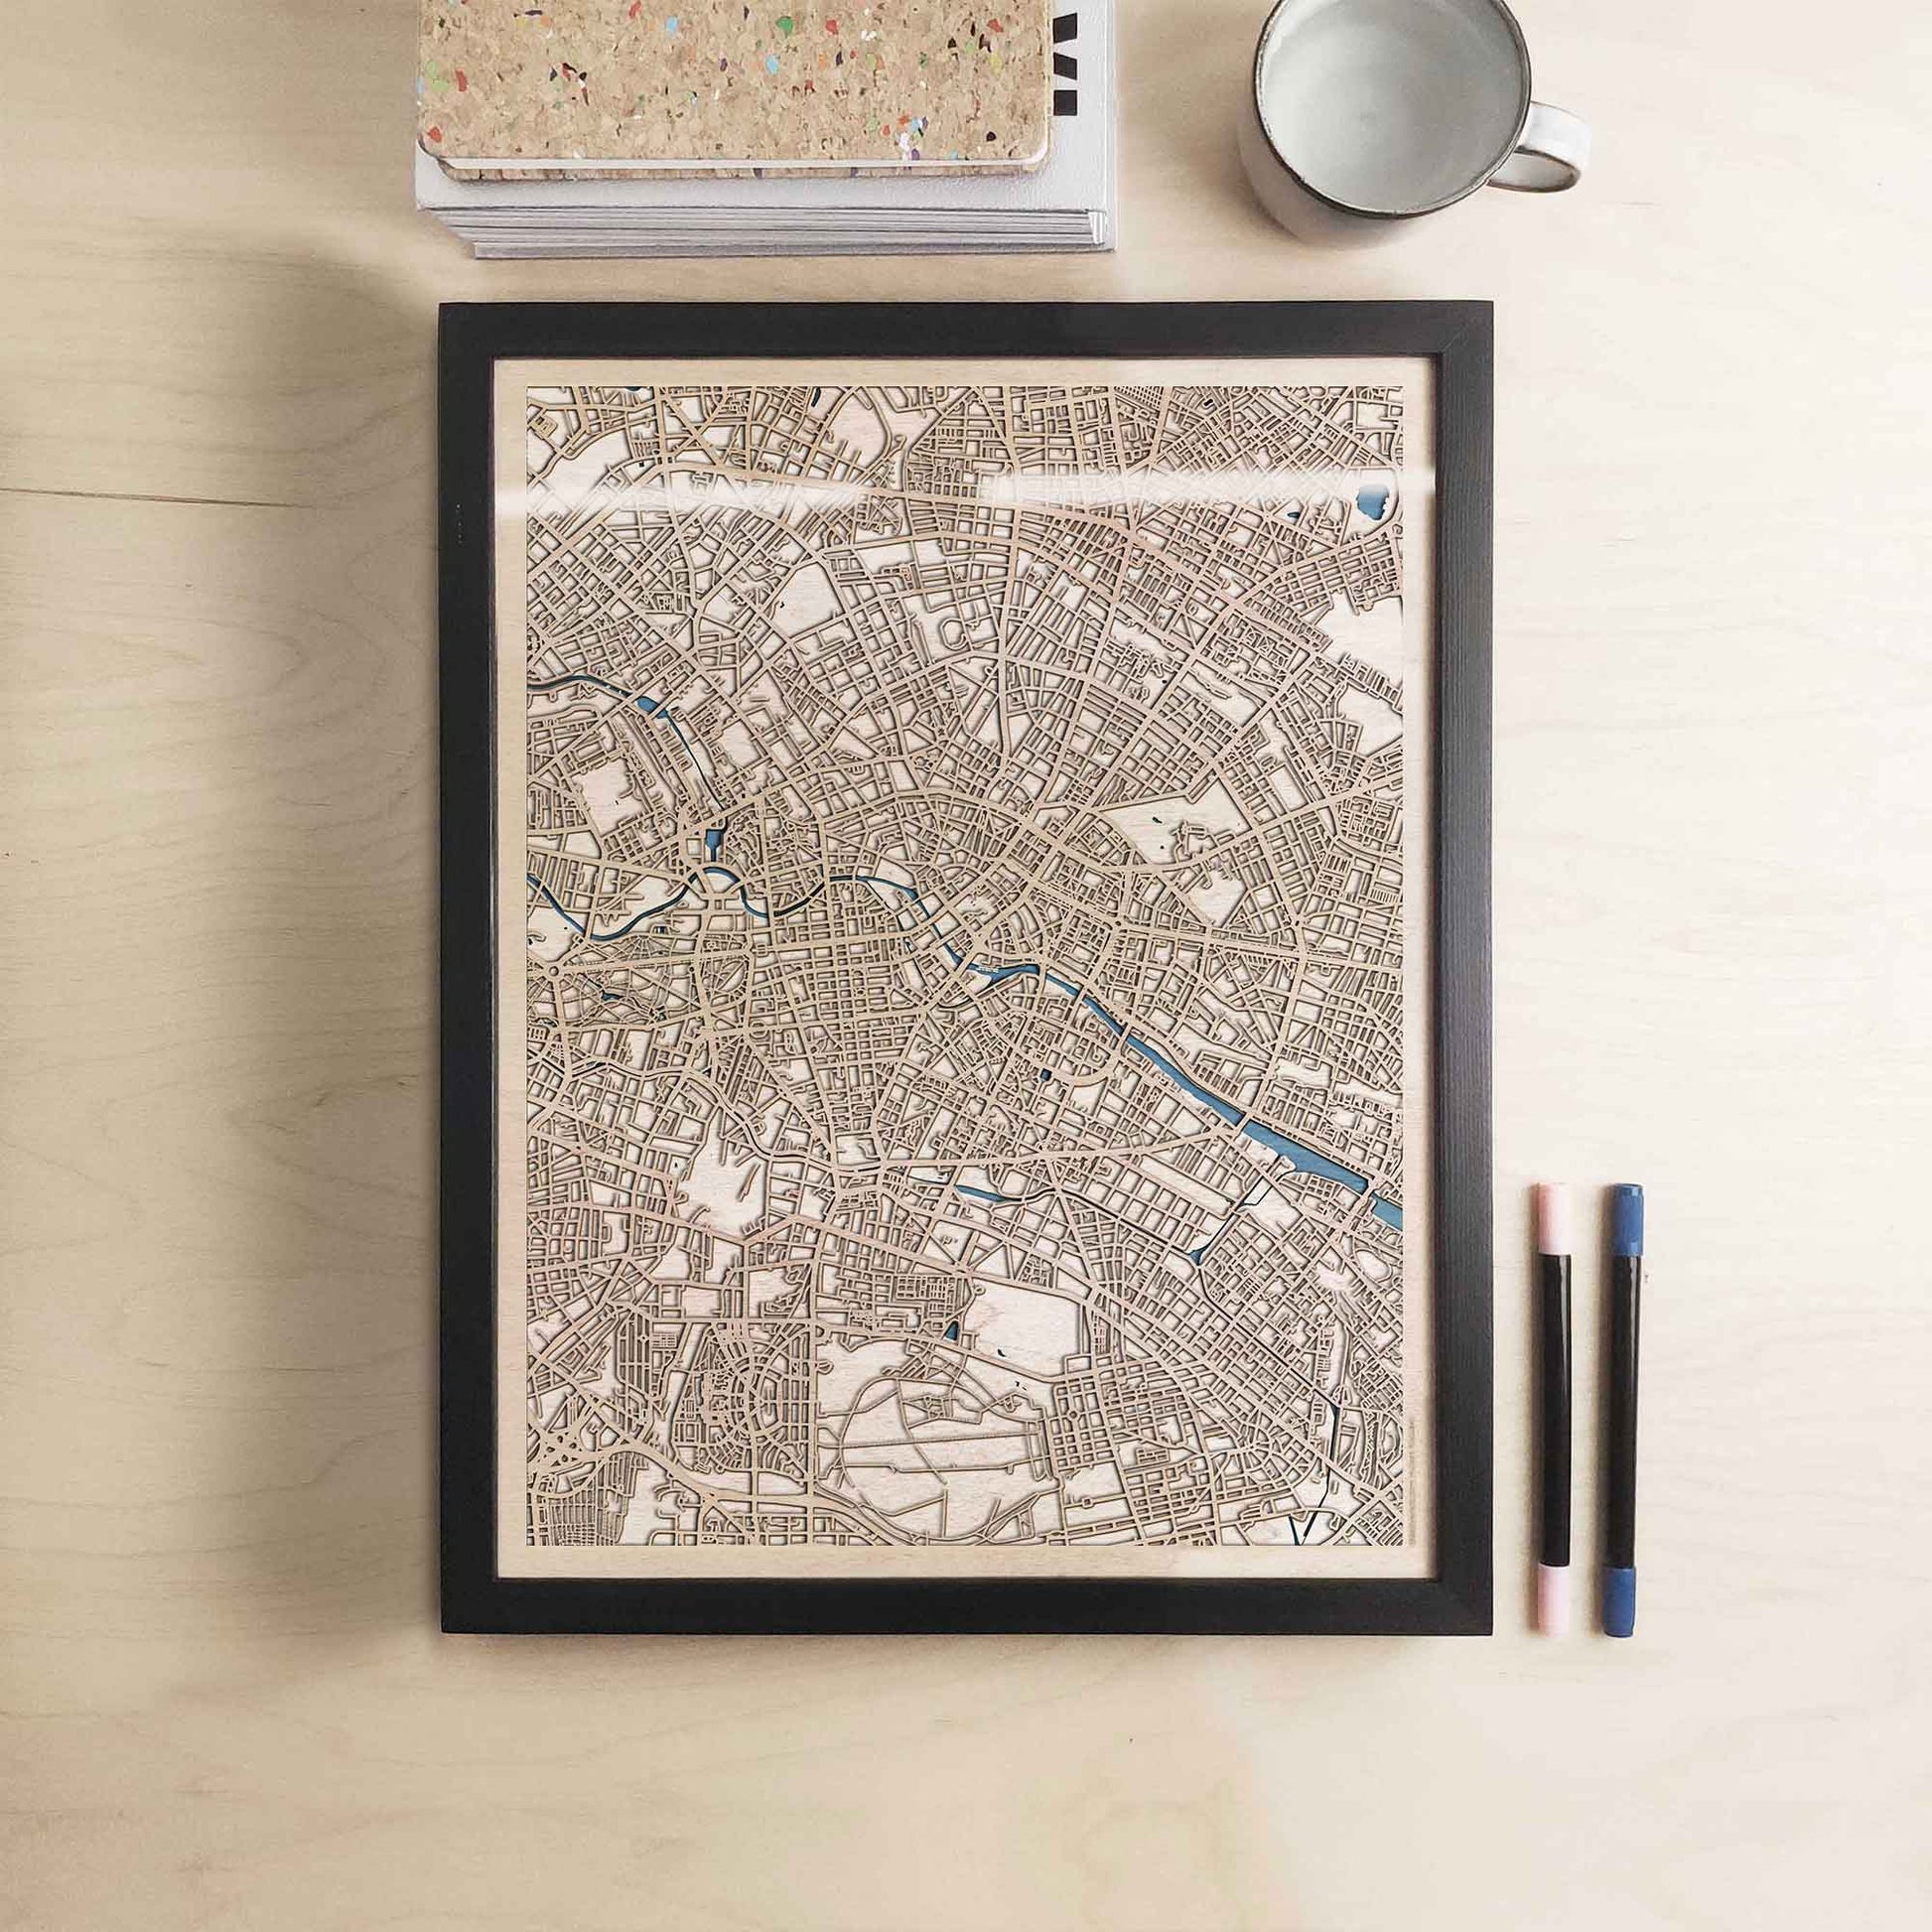 Berlin Wooden Map by CityWood - Custom Wood Map Art - Unique Laser Cut Engraved - Anniversary Gift